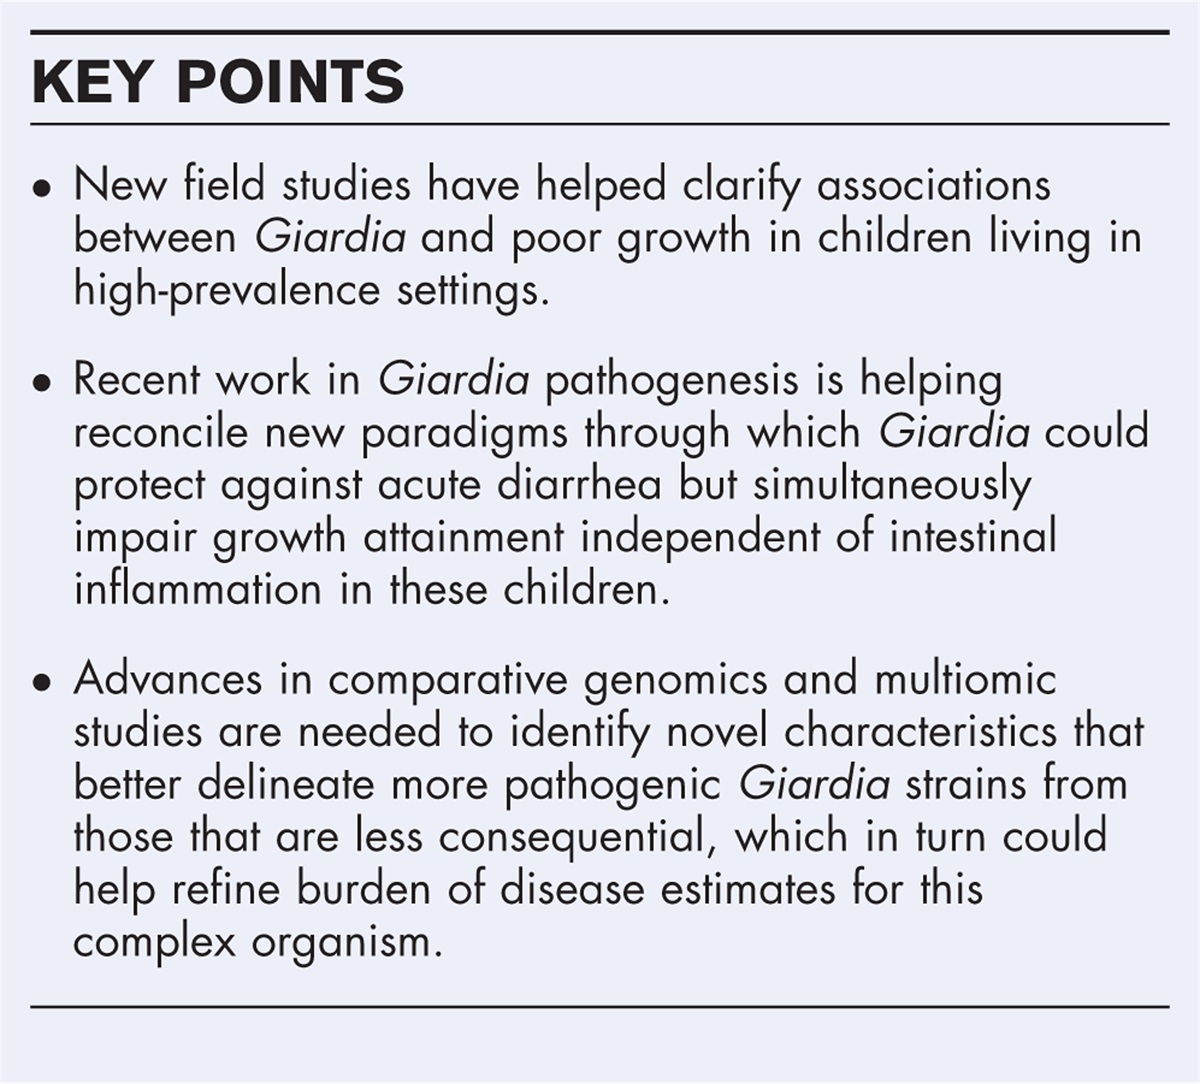 Giardia and growth impairment in children in high-prevalence settings: consequence or co-incidence?